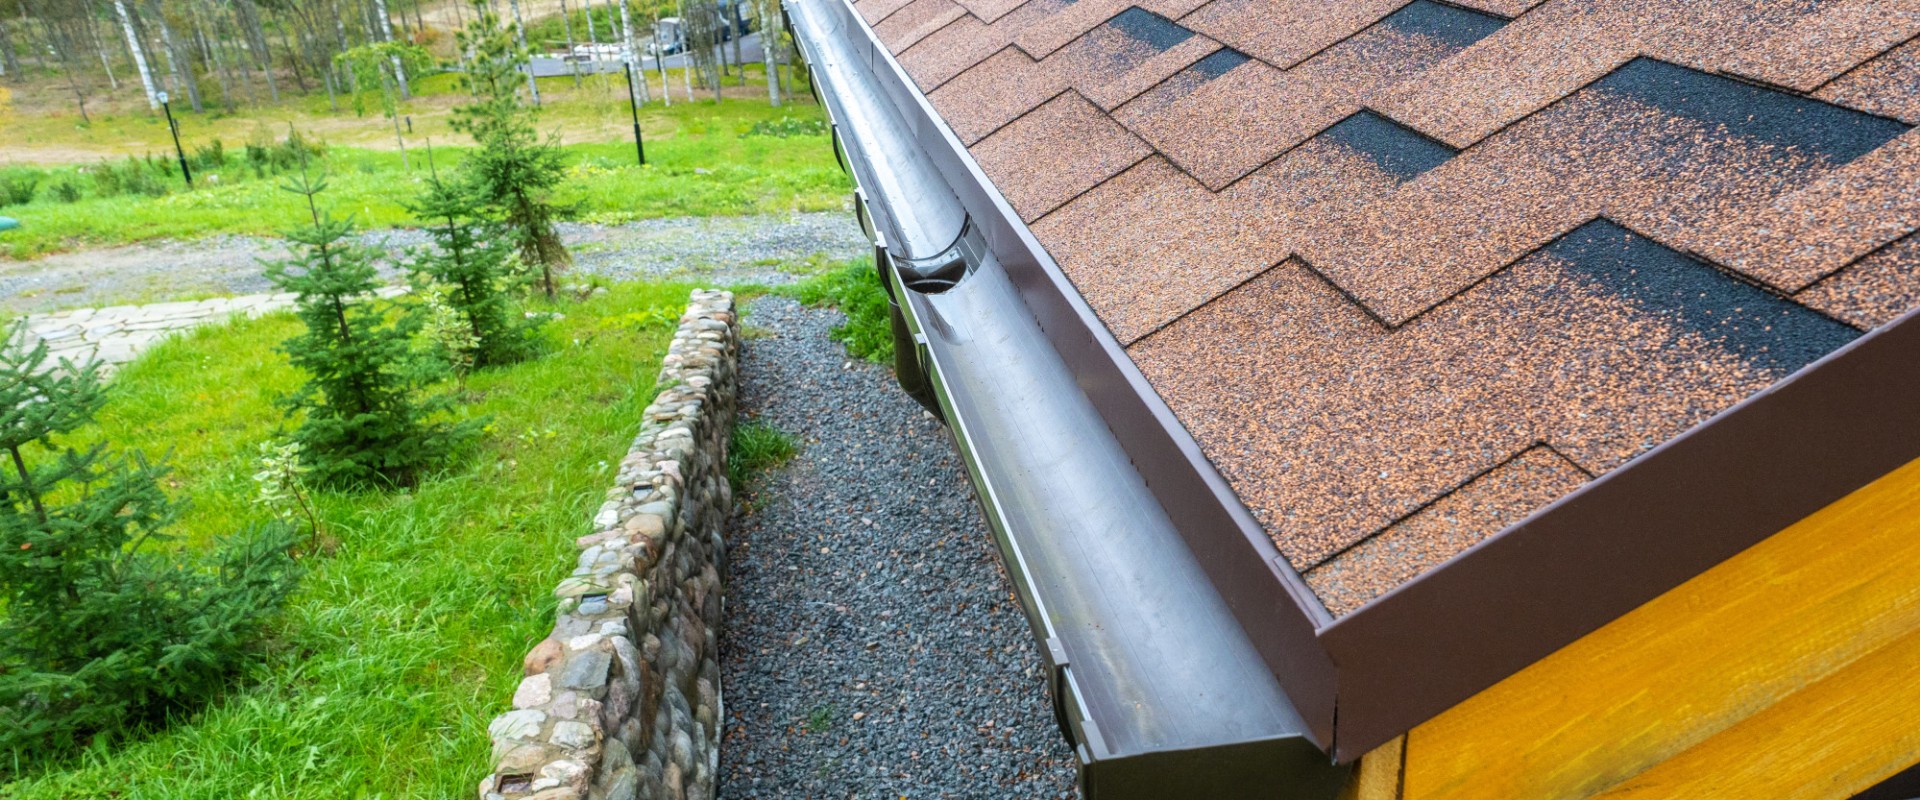 Are seamless gutters really better?